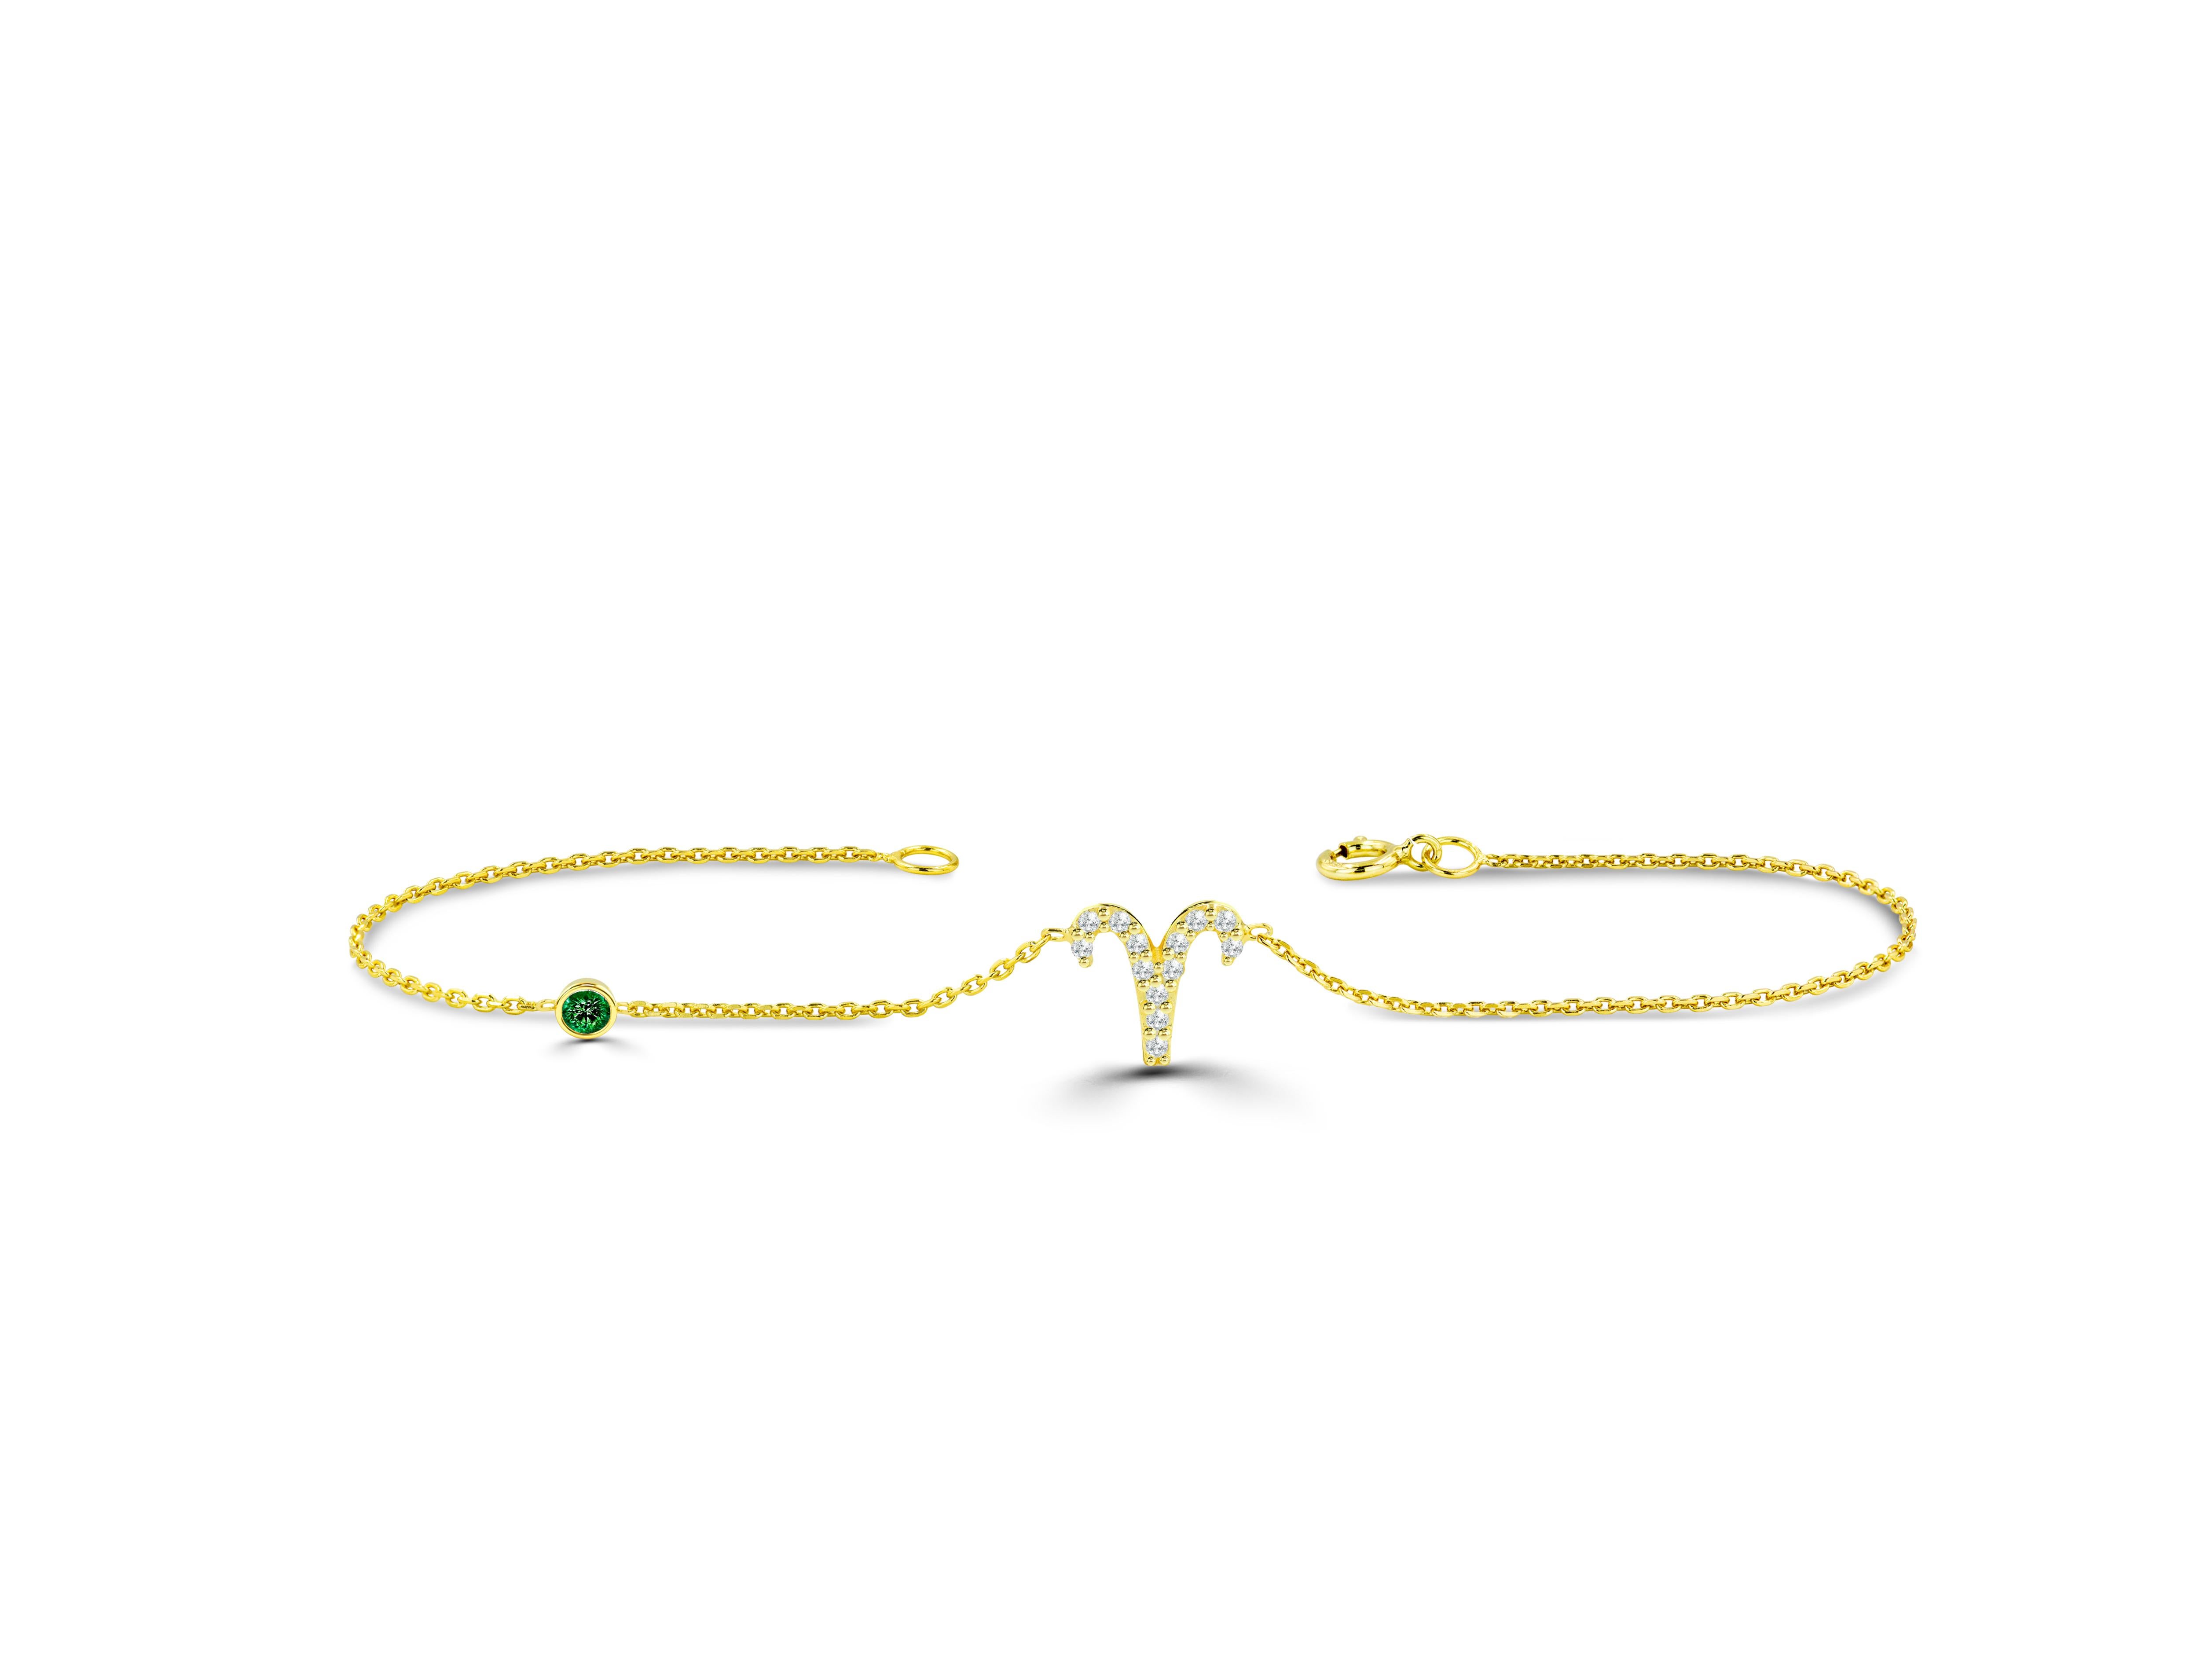 This Aries Diamond Bracelet is meant to represent you. This Zodiac sign bracelet comes with a birthstone of your choice. Our collection of zodiac necklaces includes this stunning Diamond Aries piece. All Aries out there, purchase this lovely item